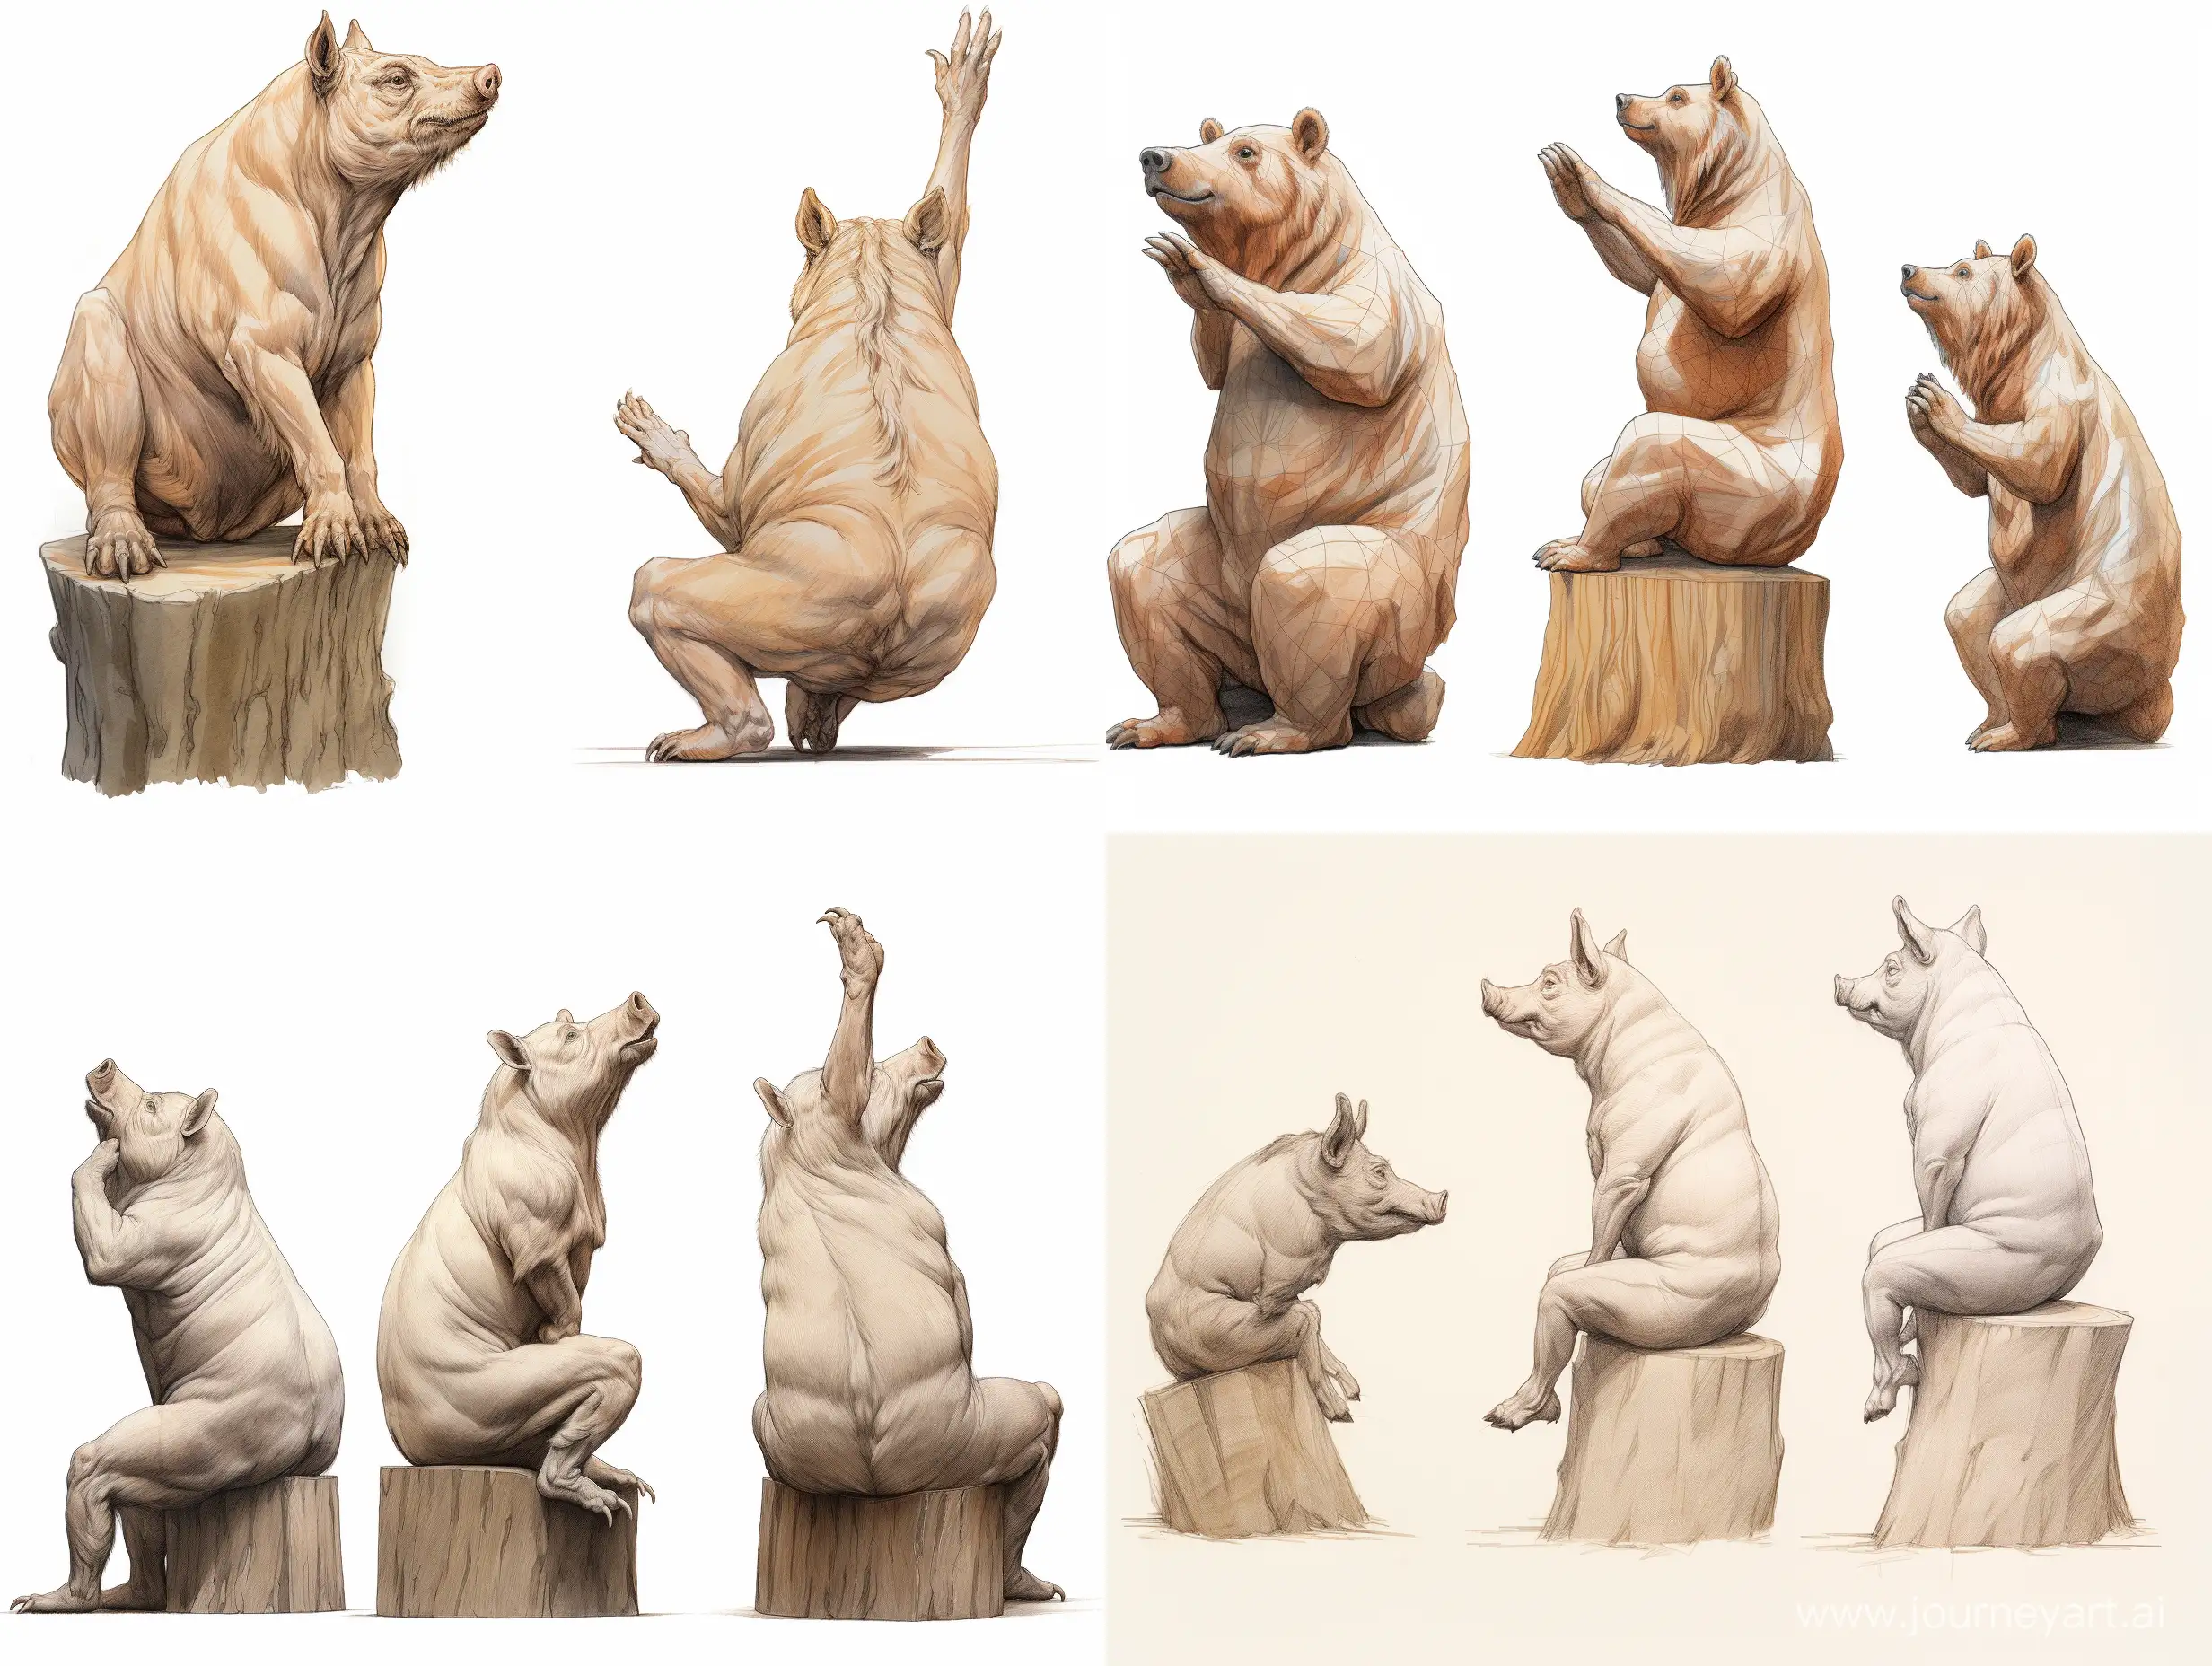 Dynamic-Wild-Boar-Wood-Carving-Sculpture-on-Wooden-Cube